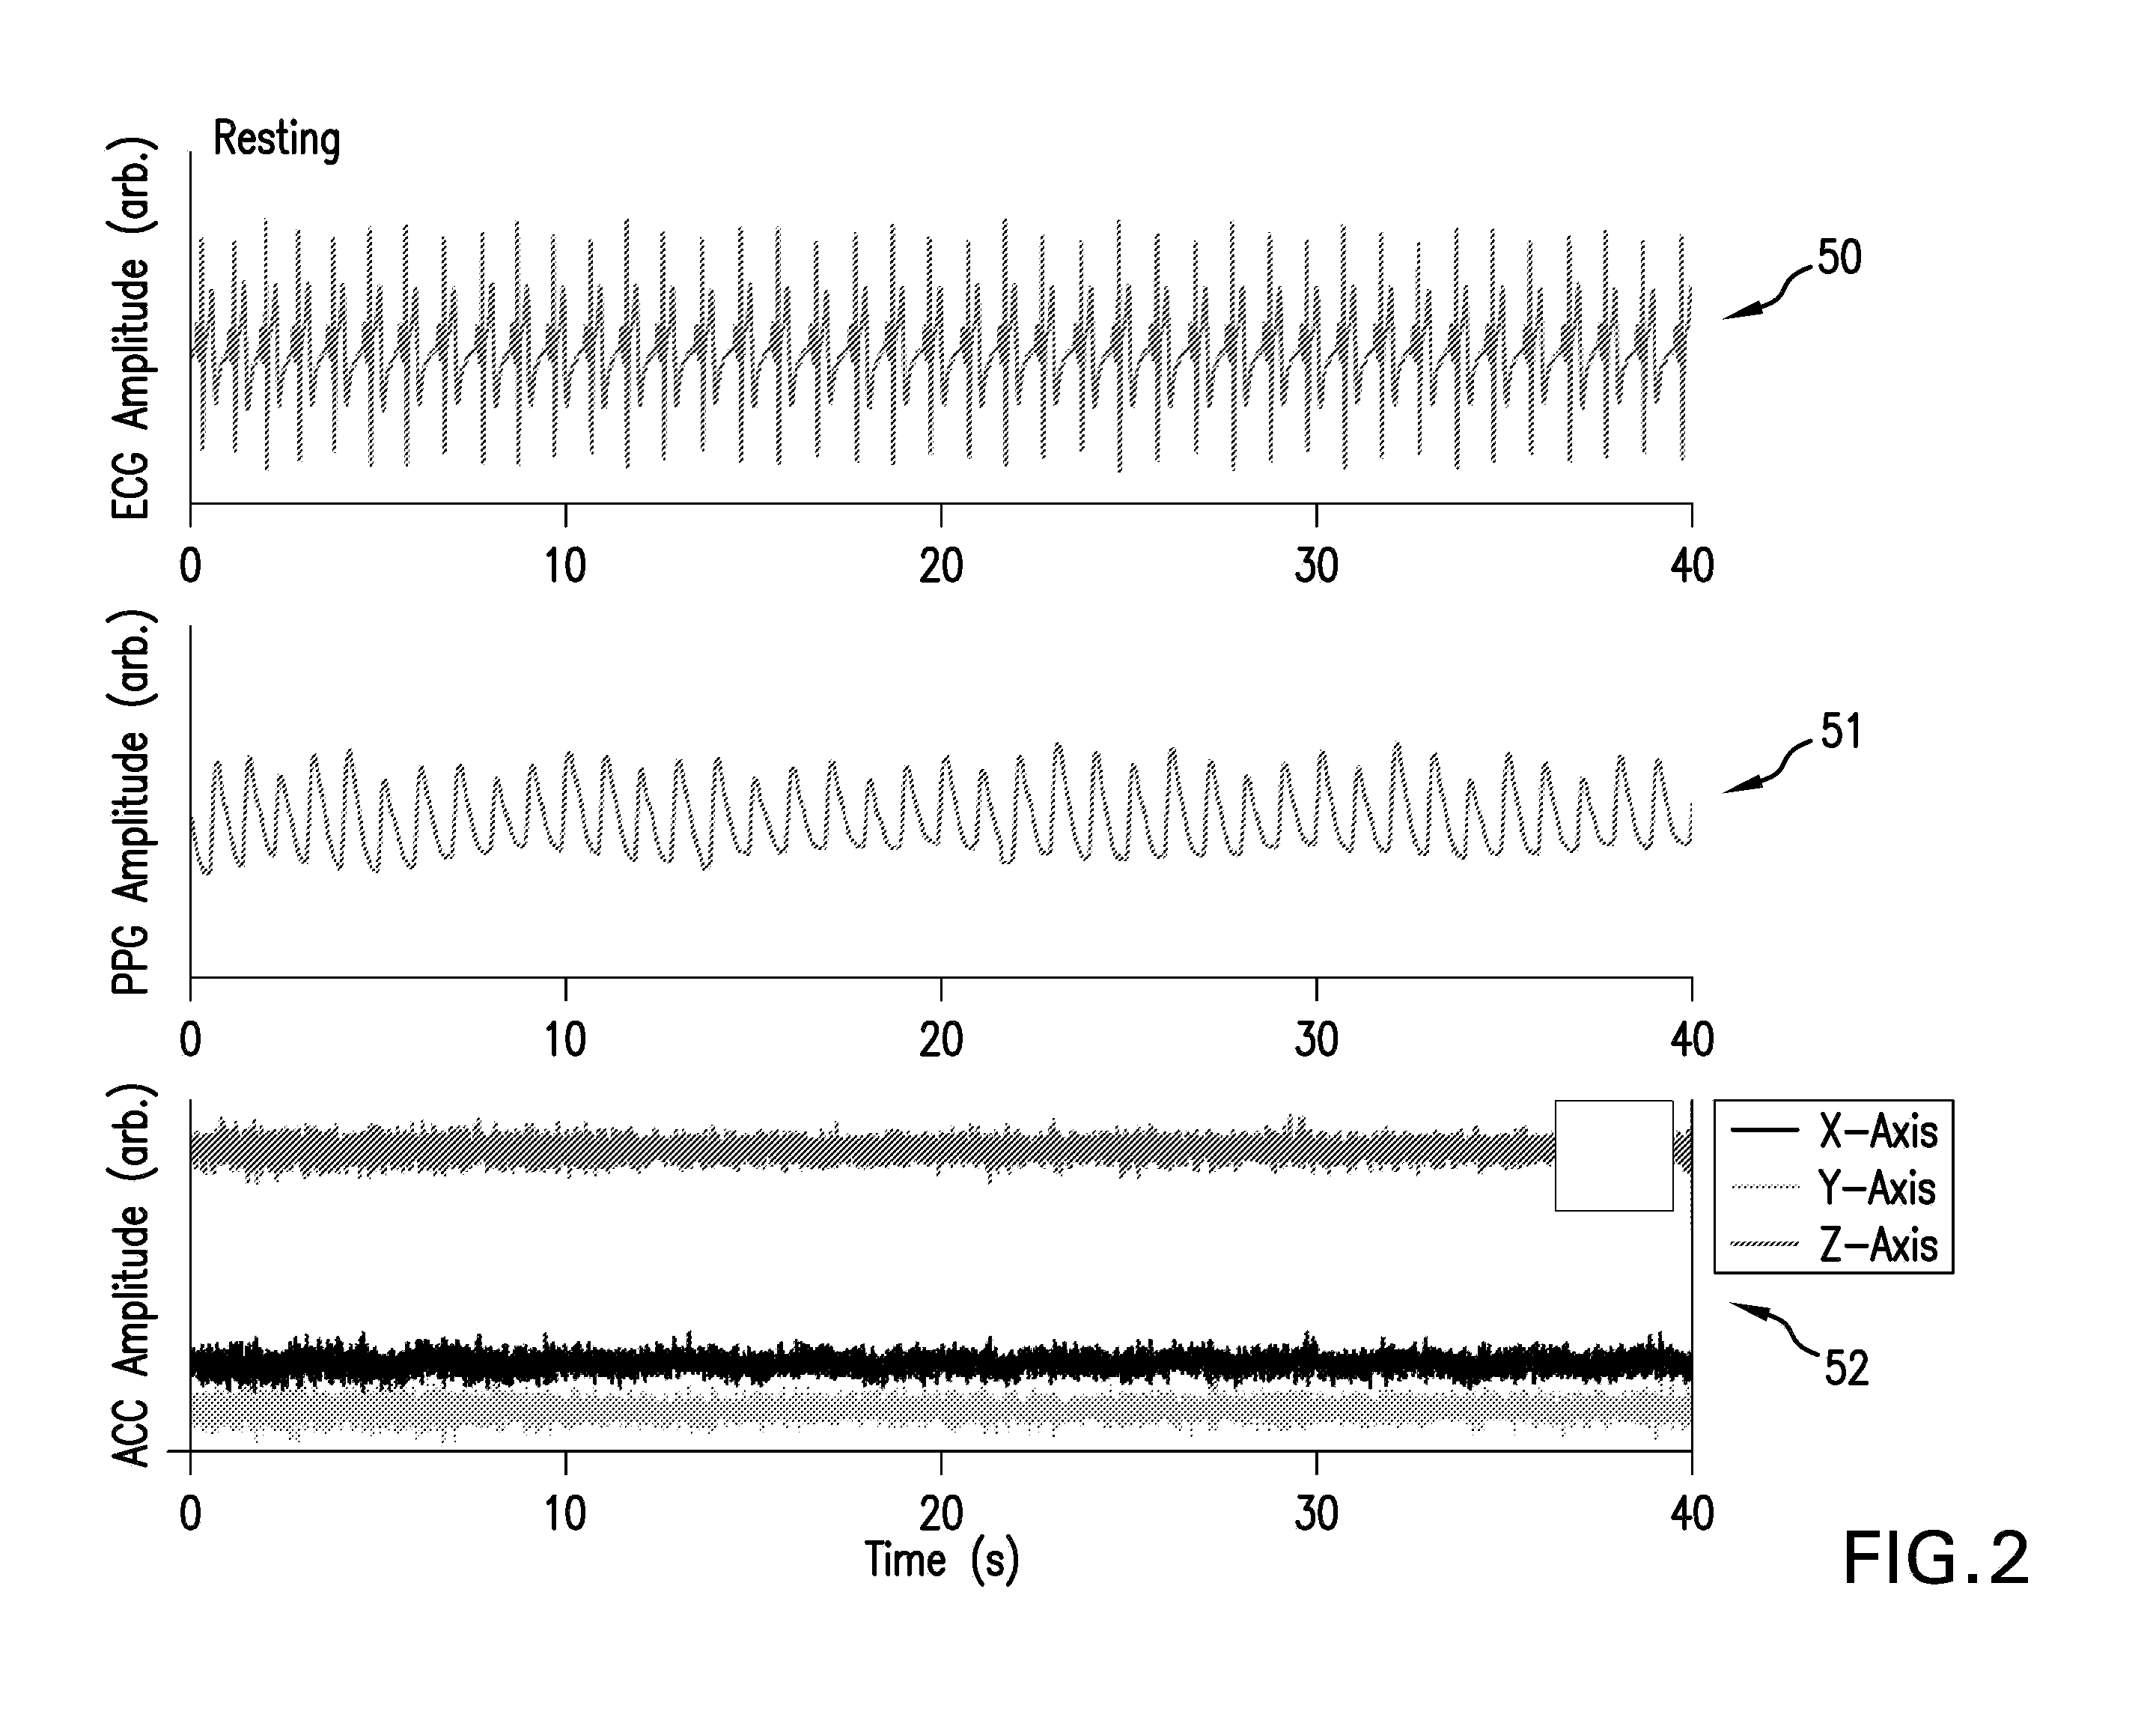 Graphical mapping system for continuously monitoring a patient's vital signs, motion, and location